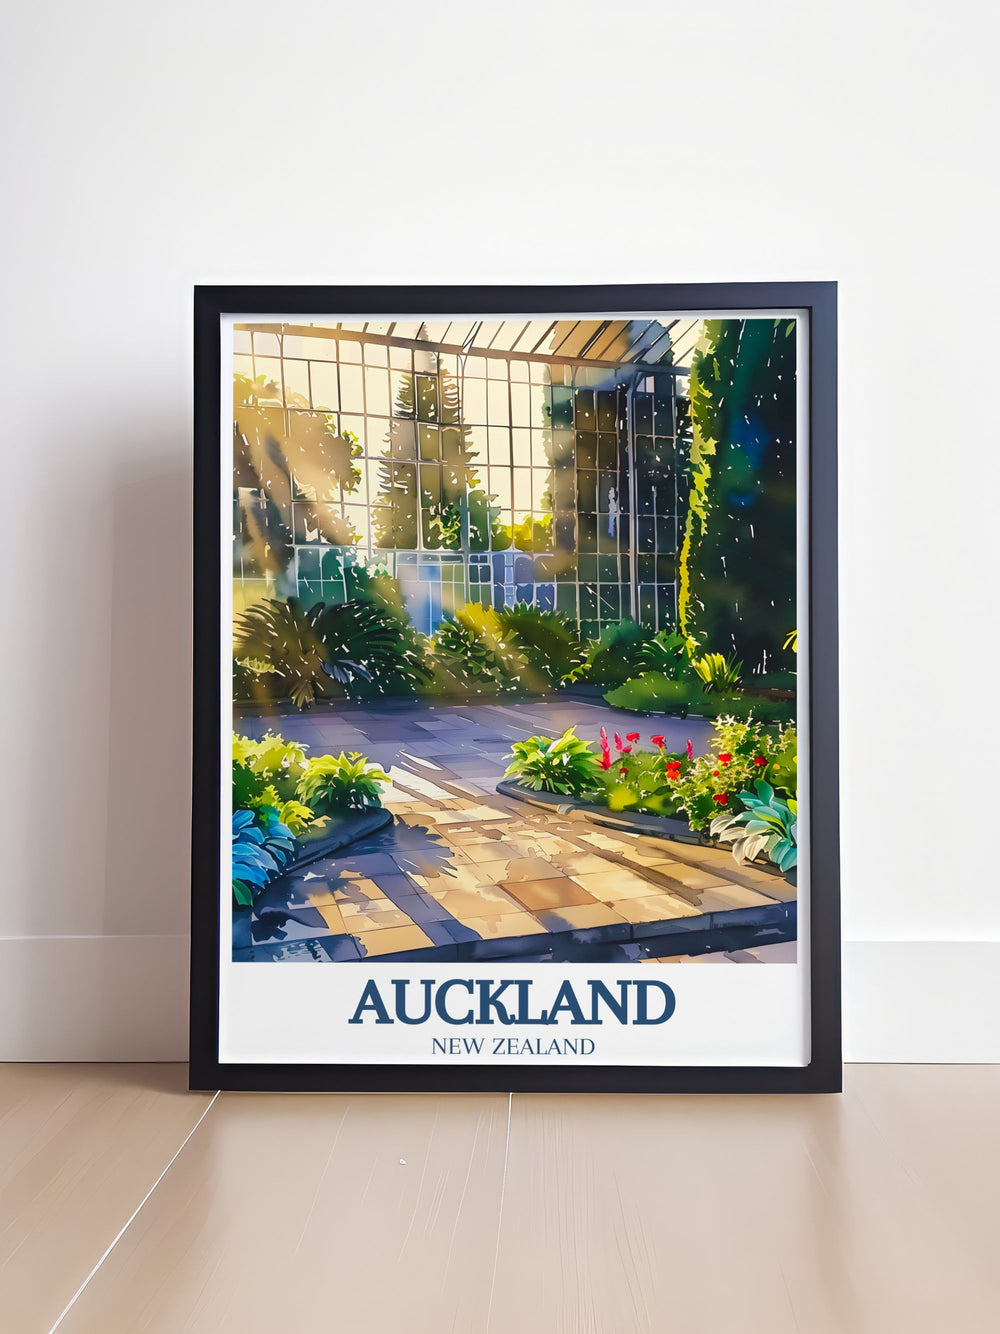 Beautiful Auckland art print capturing the botanical beauty of the Wintergardens with their vibrant colors and delicate plants, perfect for home decor.